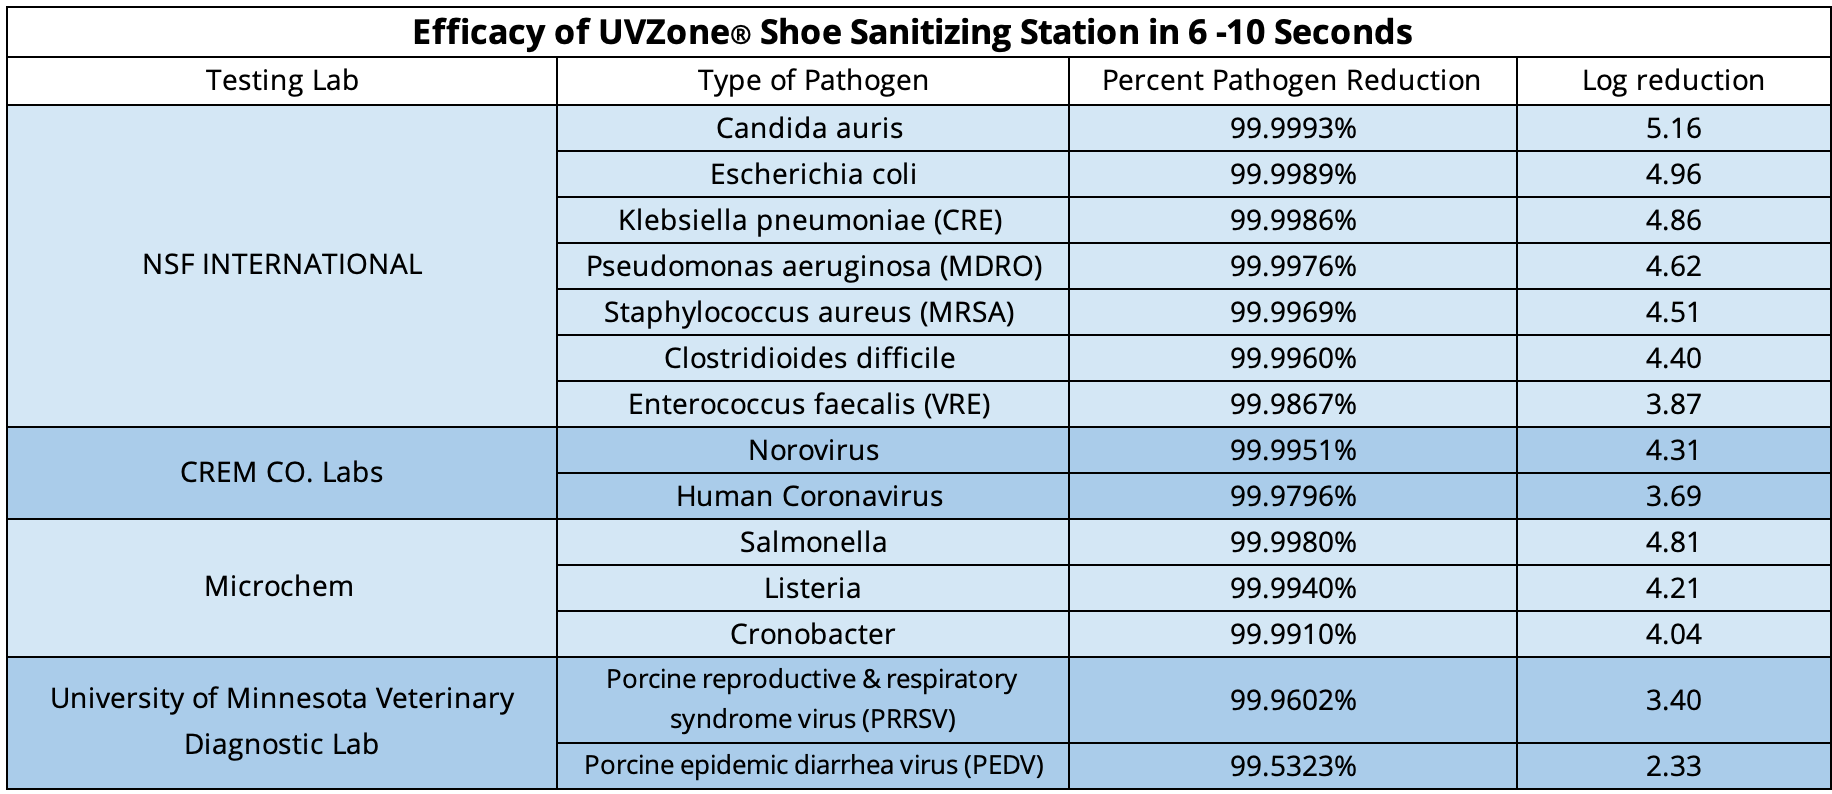 Efficacy chart outlining UVZone disinfection rates in 6 - 10 seconds.